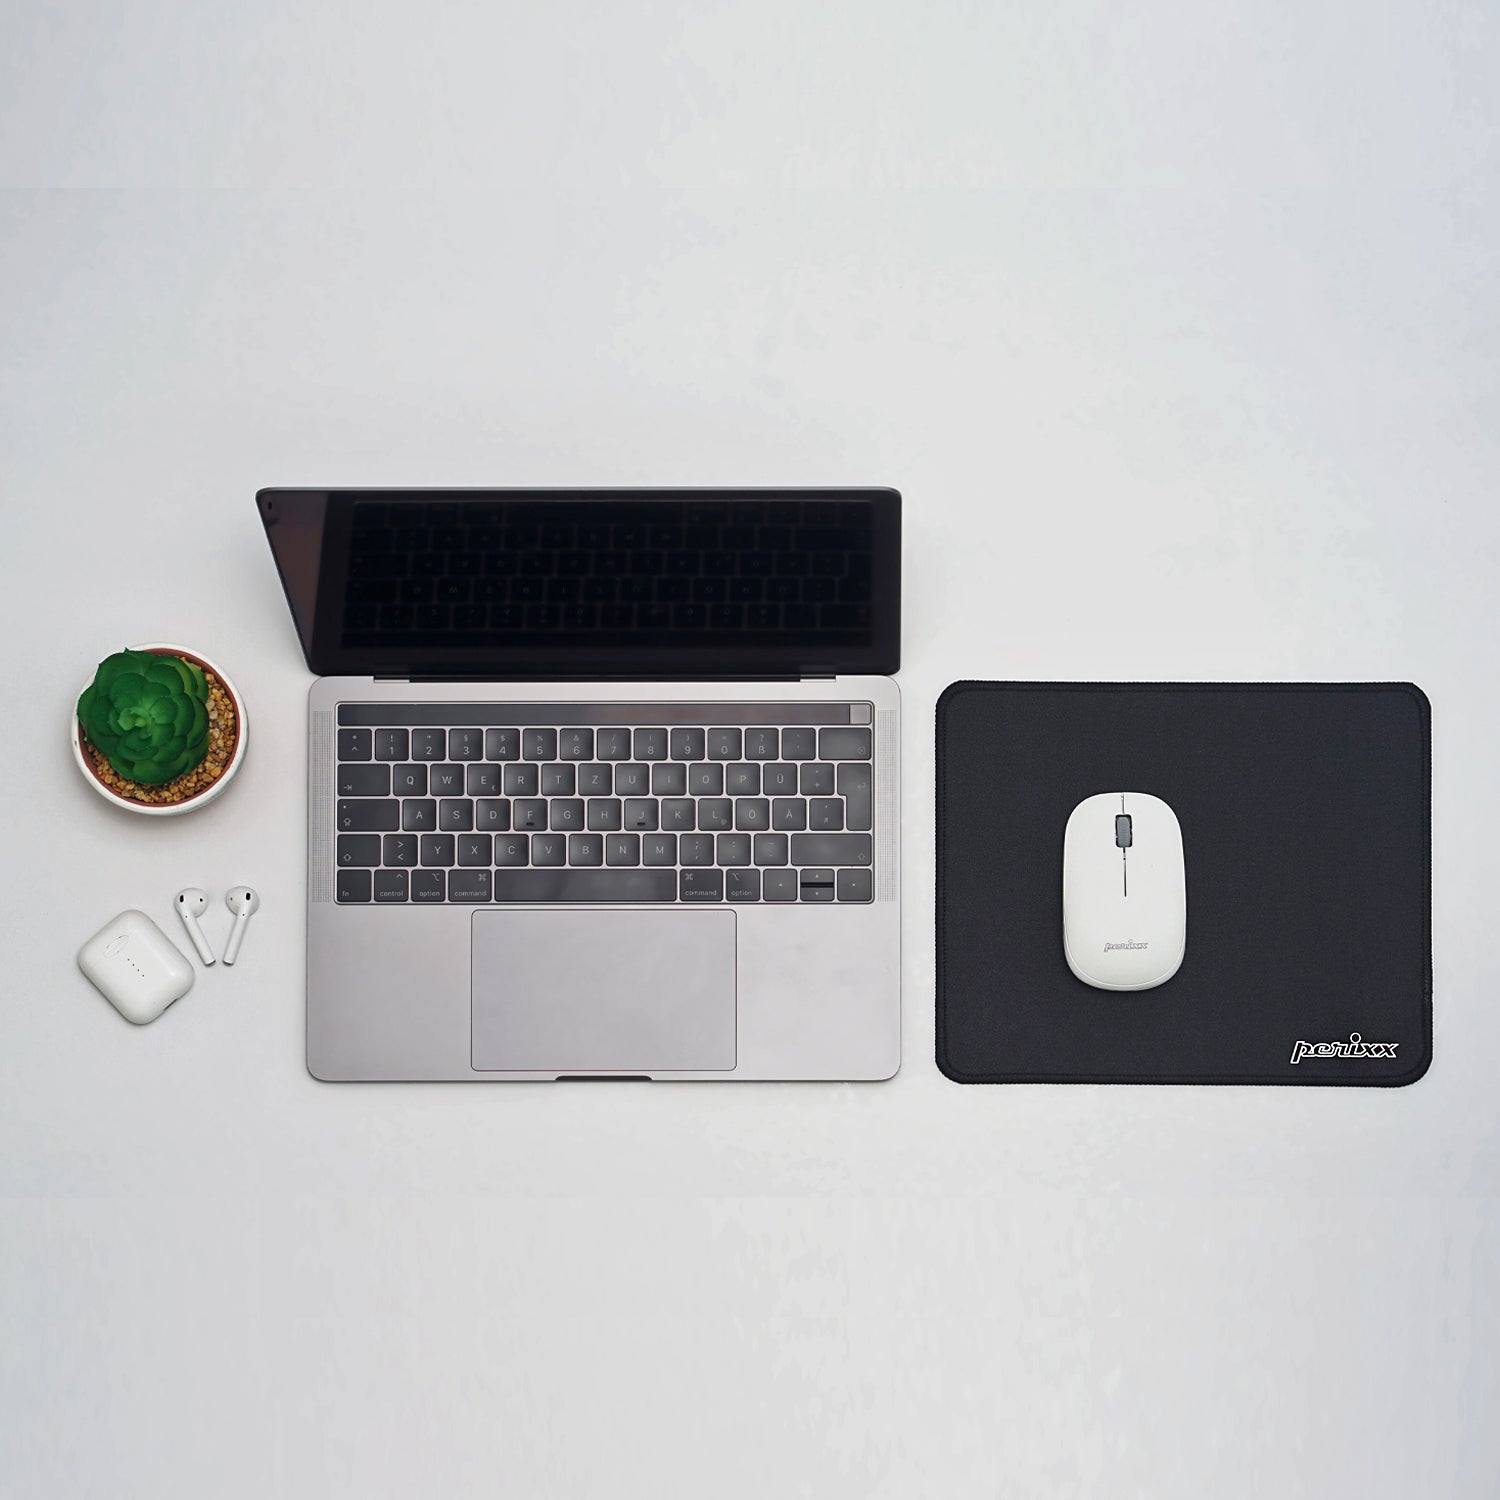 DX-1000 - Mouse Pad Stitched Edges Waterproof (M) - Perixx Europe